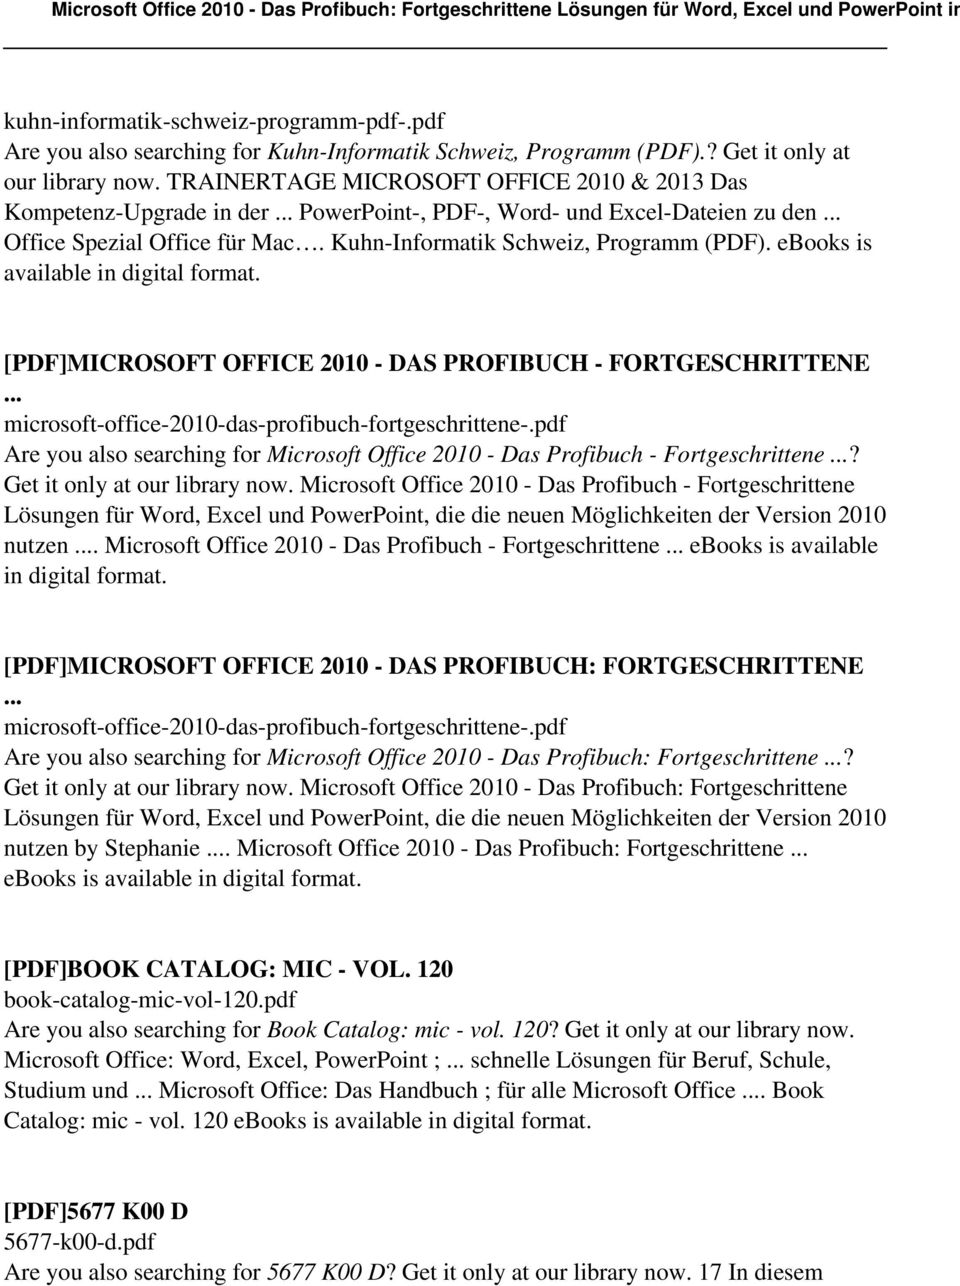 ebooks is available in digital [PDF]MICROSOFT OFFICE 2010 - DAS PROFIBUCH - FORTGESCHRITTENE Are you also searching for Microsoft Office 2010 - Das Profibuch - Fortgeschrittene?